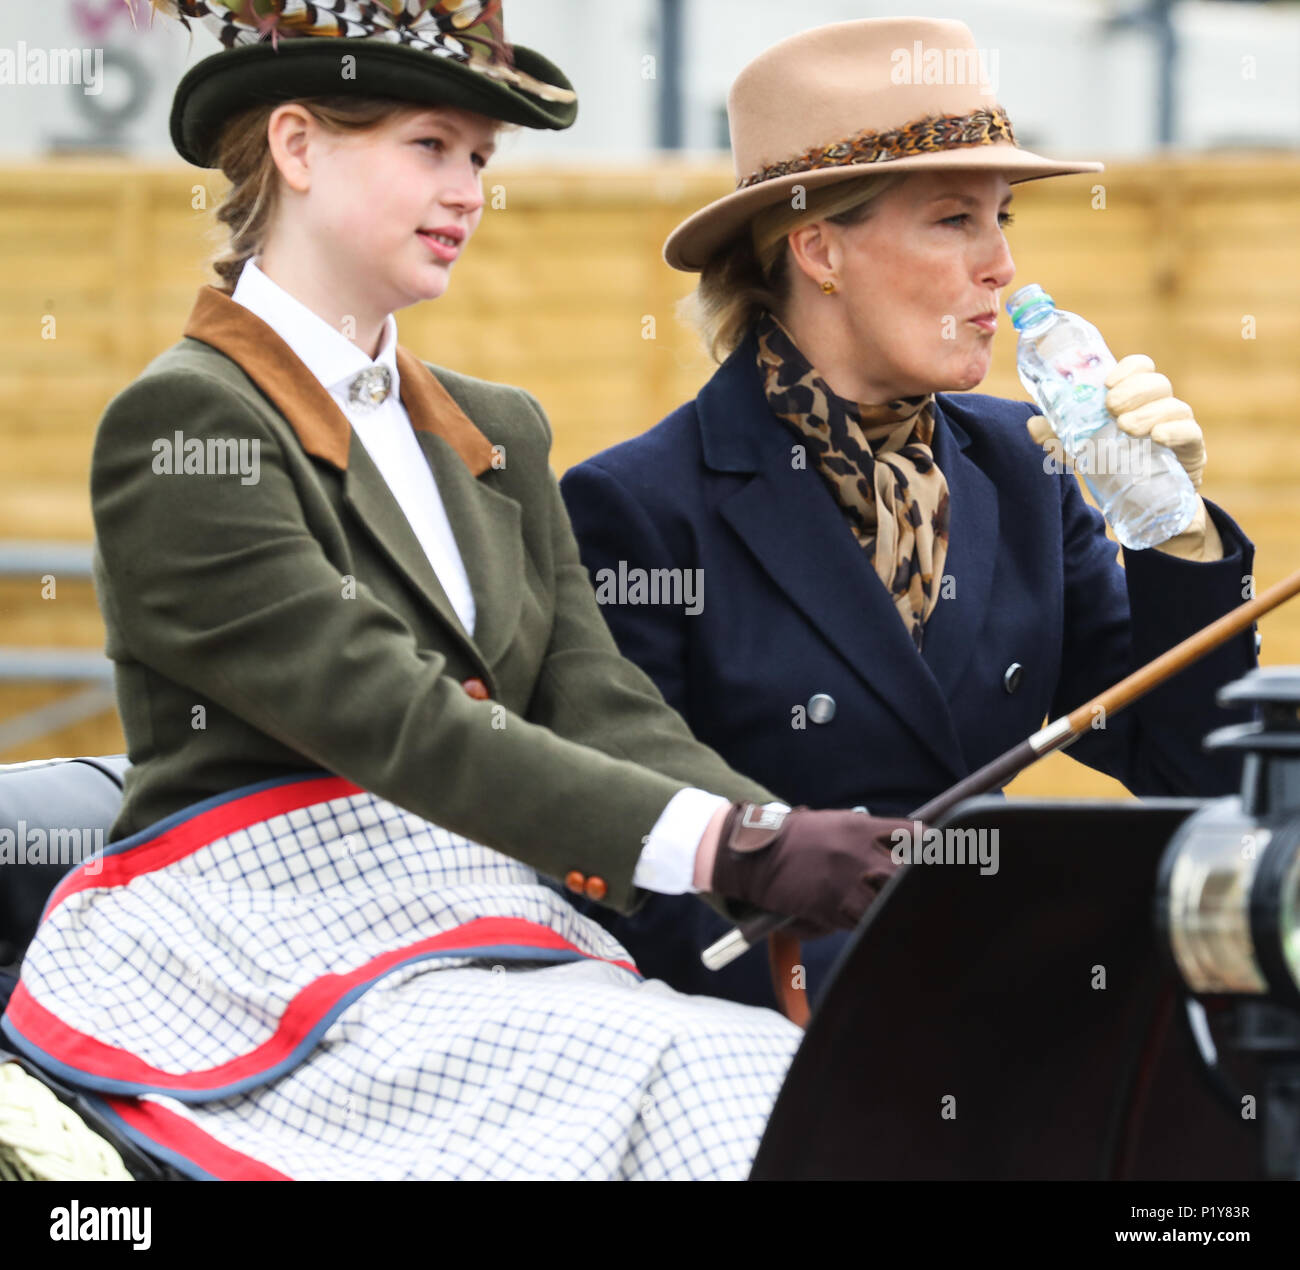 royal-windsor-horse-show-day-5-featuring-lady-louise-windsor-sophie-countess-of-wessex-where-windsor-united-kingdom-when-13-may-2018-credit-john-rainfordwenncom-P1Y83R.jpg